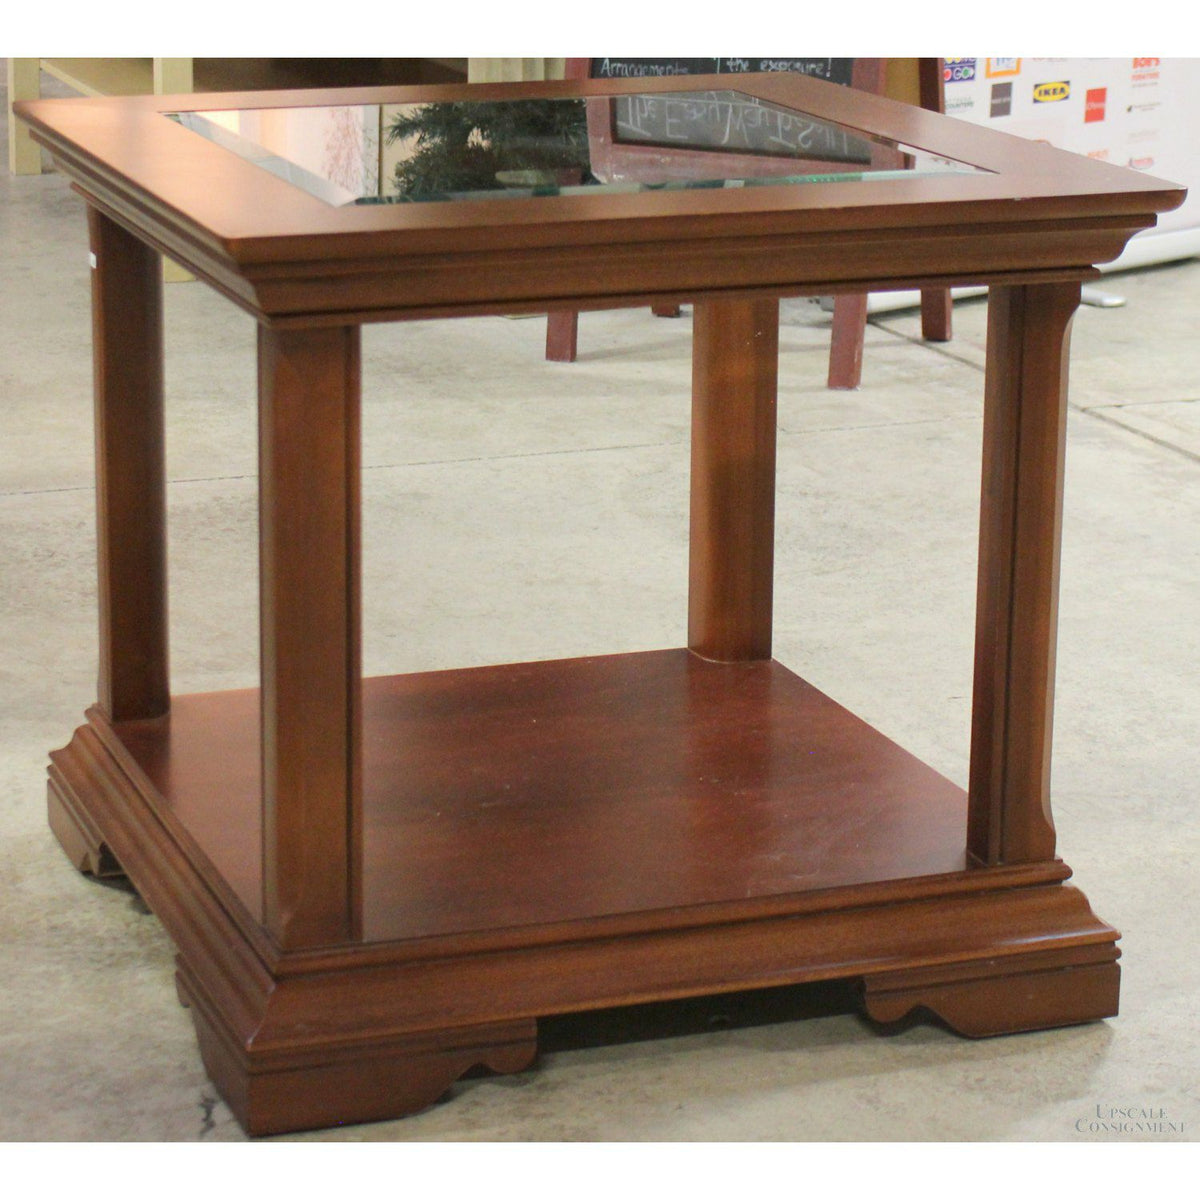 Thomasville Square End Table w/Glass Insert Top